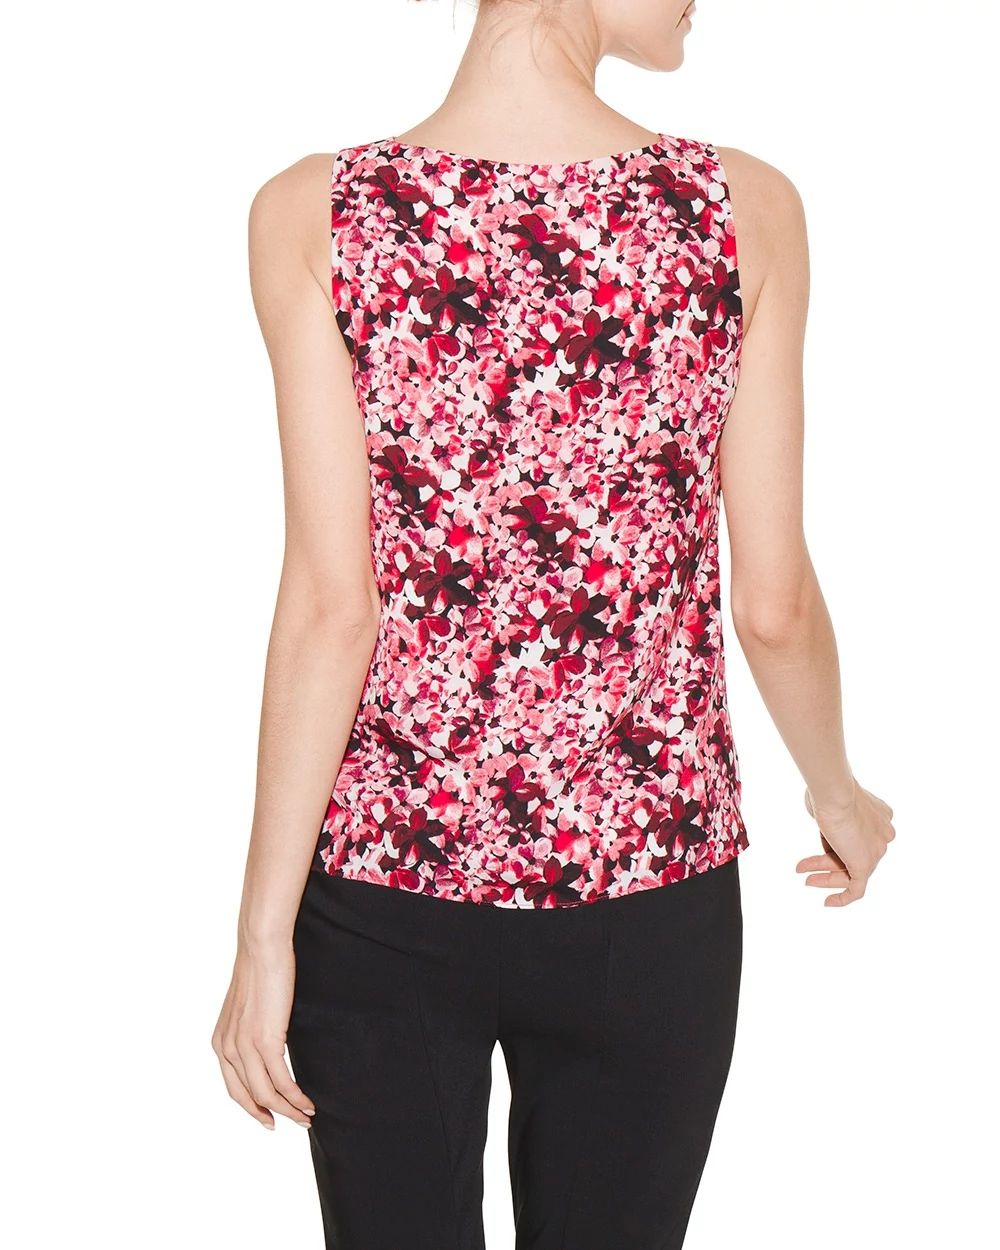 Outlet WHBM Printed Crisscross Double-Layer Shell click to view larger image.